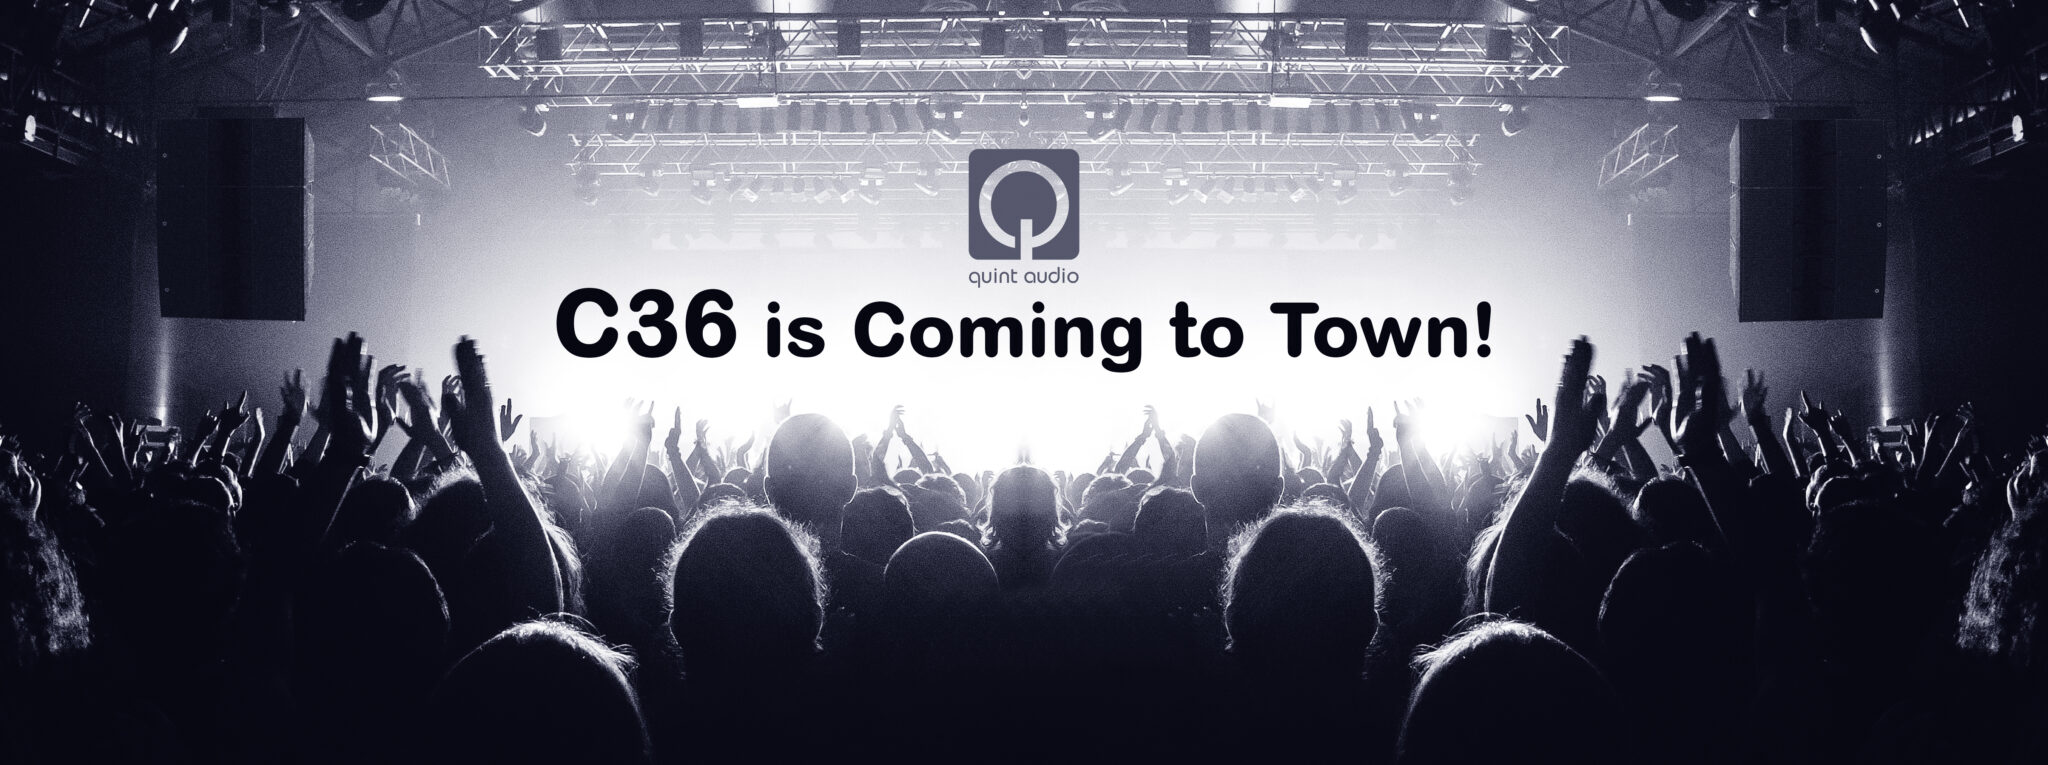 C36 is coming to town